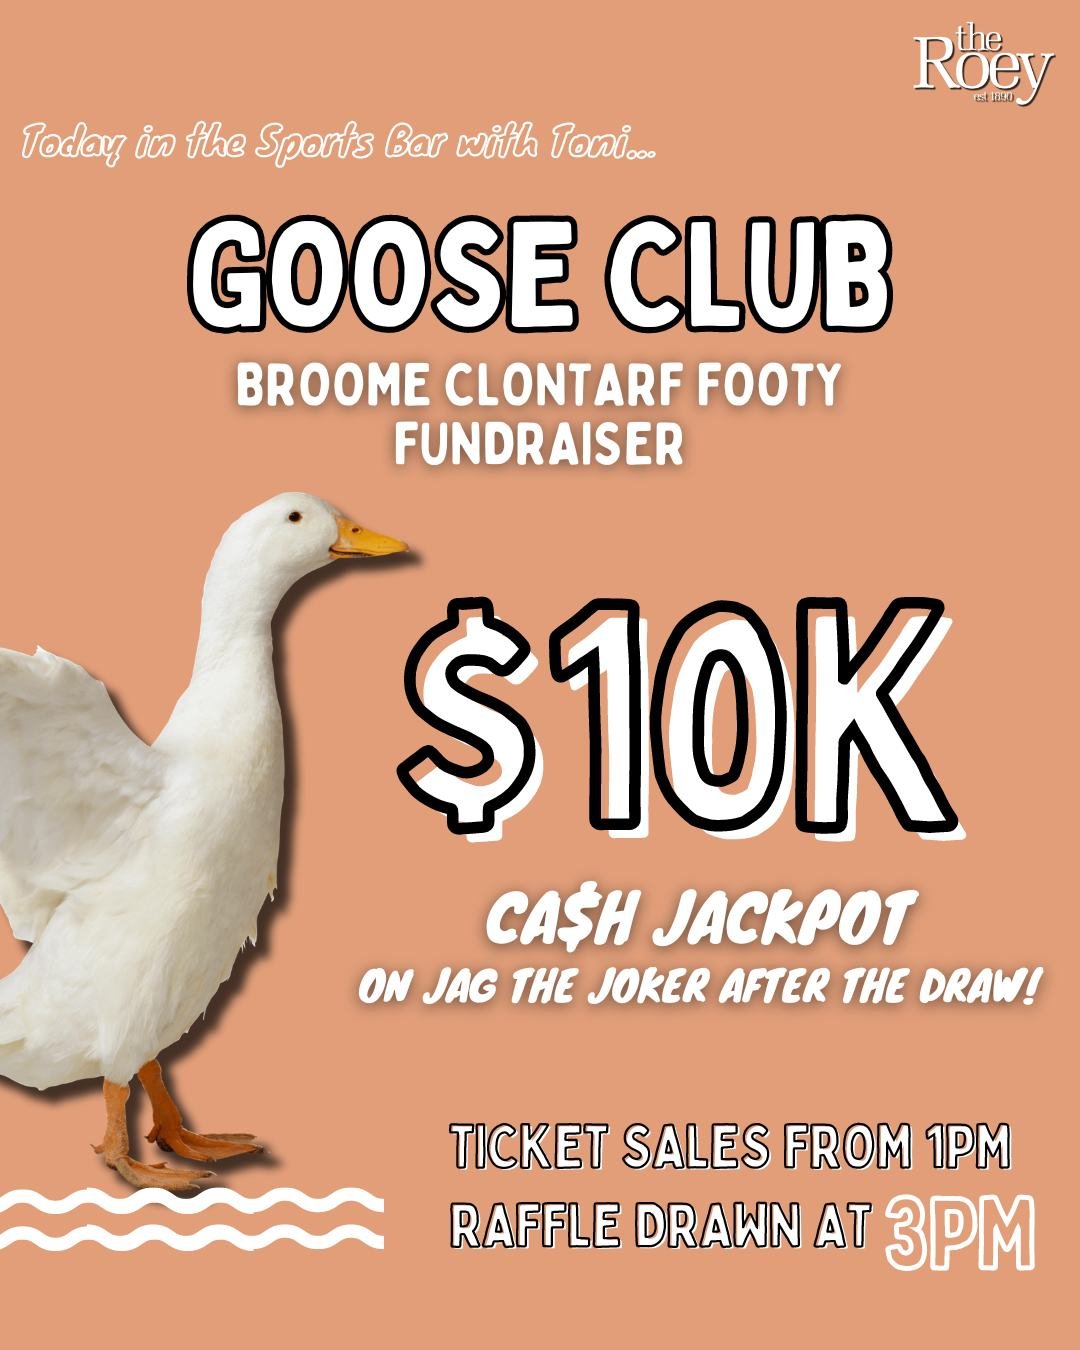 MAY THE FOURTH be with you 🤘🏽😝

Sorry, we just HAD to 😂 but now we've got your attention, here's whats happening SATURDAY at The Roey 👇🏽

GOOSE CLUB 👉🏽 this week raising funds for Broome Clontarf Footy 🫶🏽

$10K CASH JACKPOT 🤑 on Jag the Jo